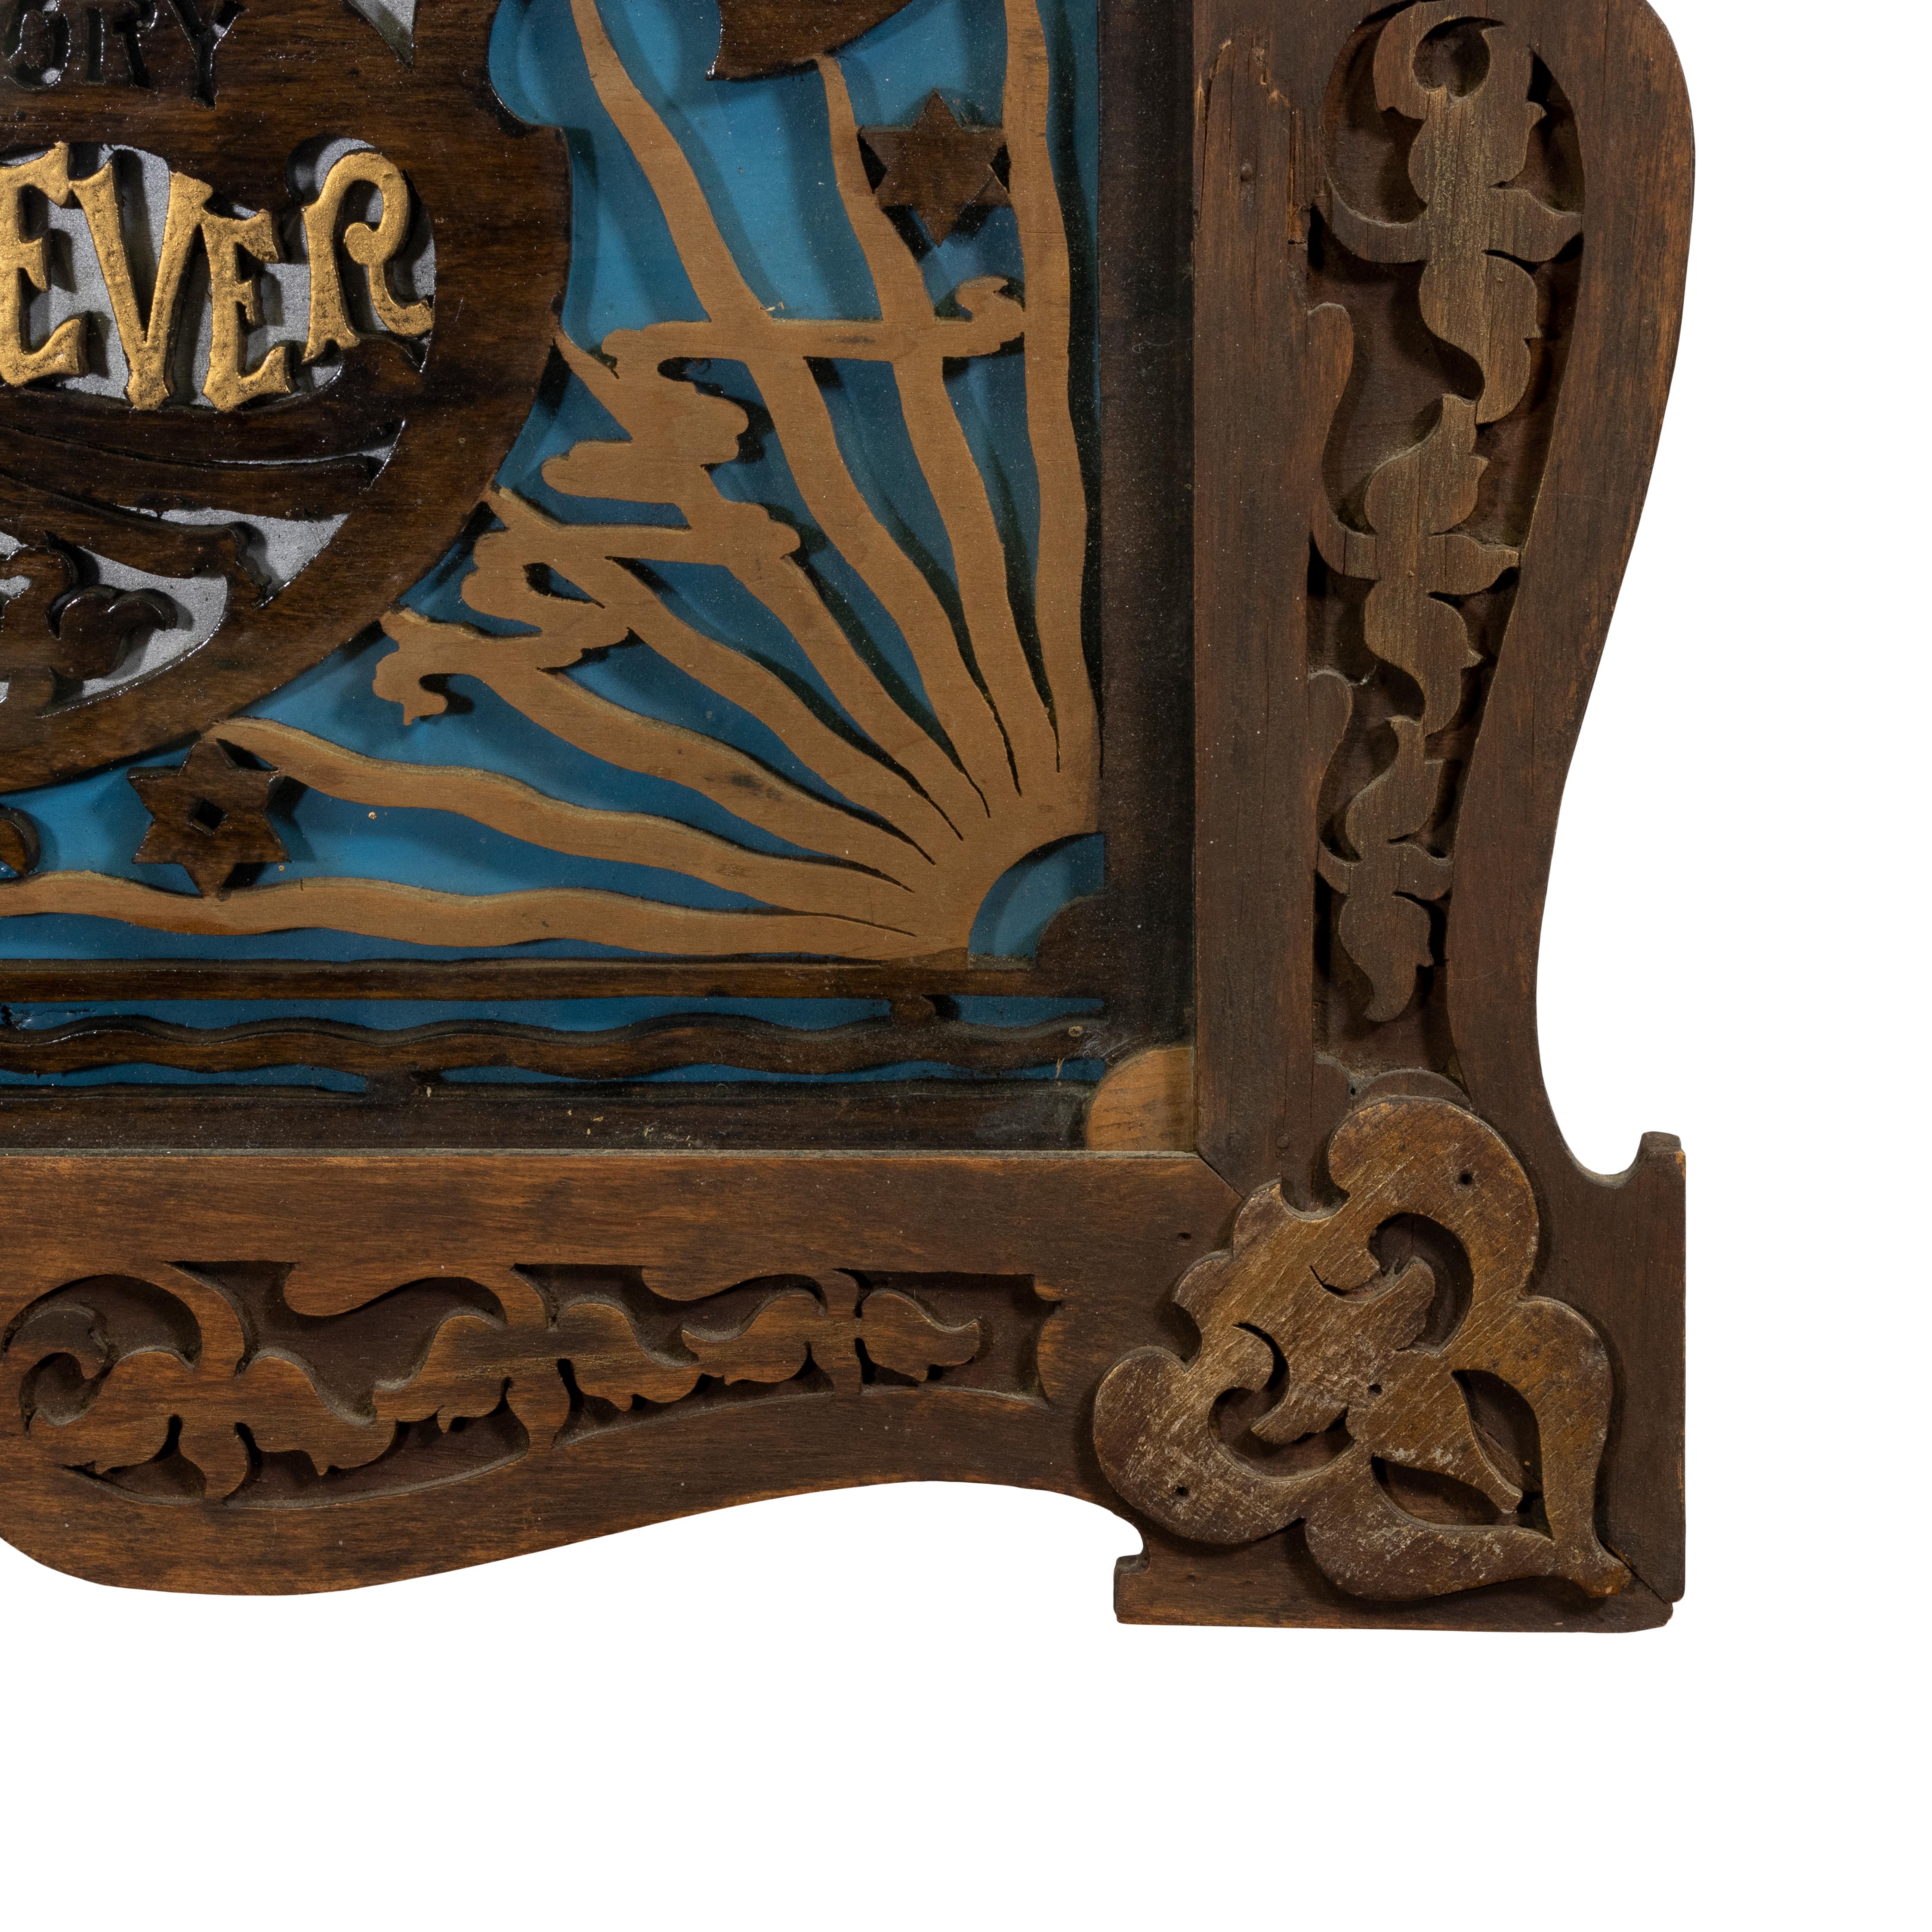 Wood cutout of the Lord's Prayer with frame. 23